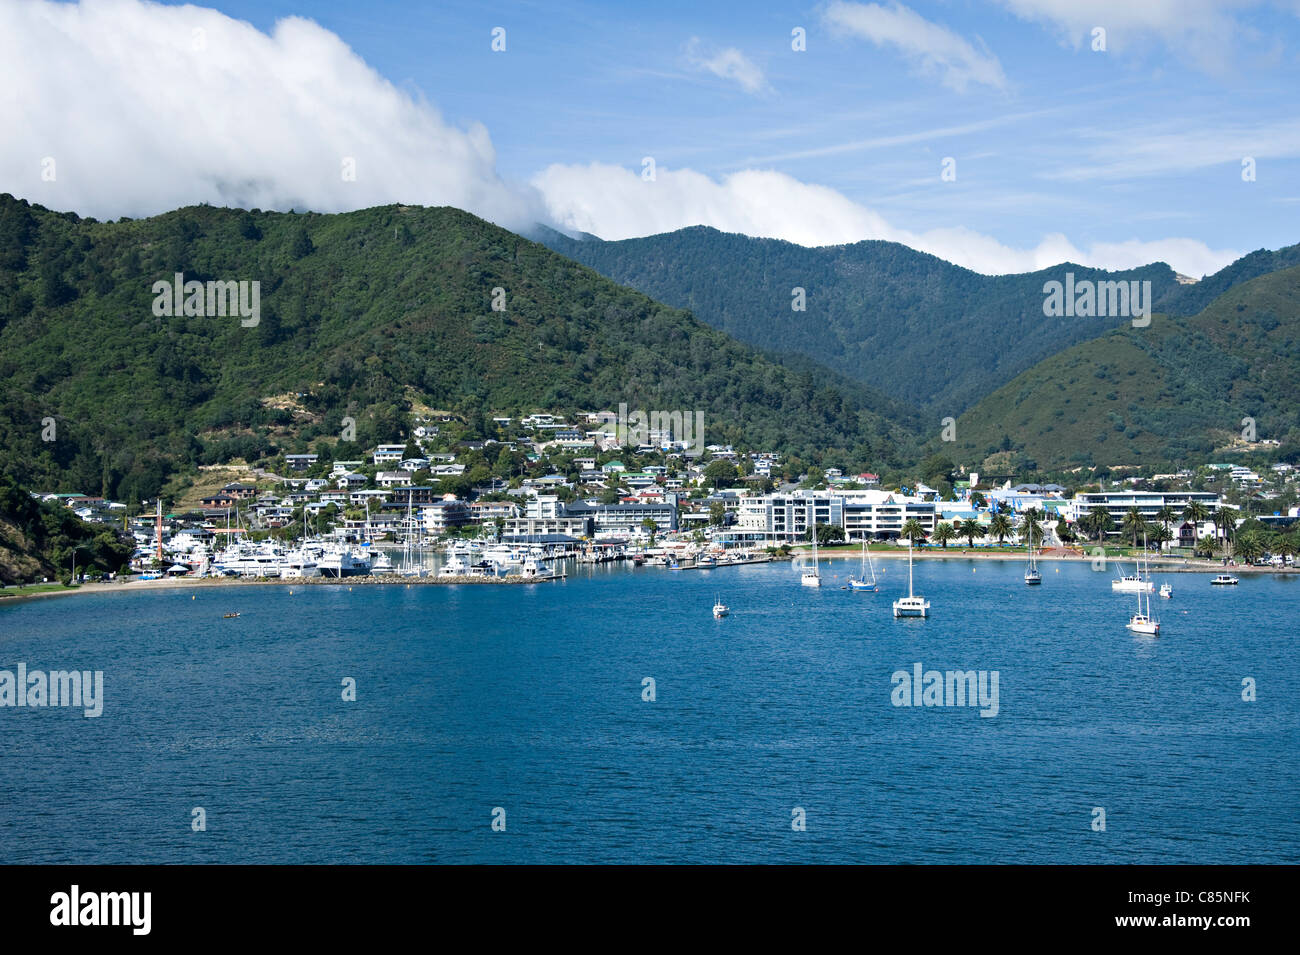 Arriving at Picturesque Picton Harbour by Ferry Boat South Island New Zealand Stock Photo